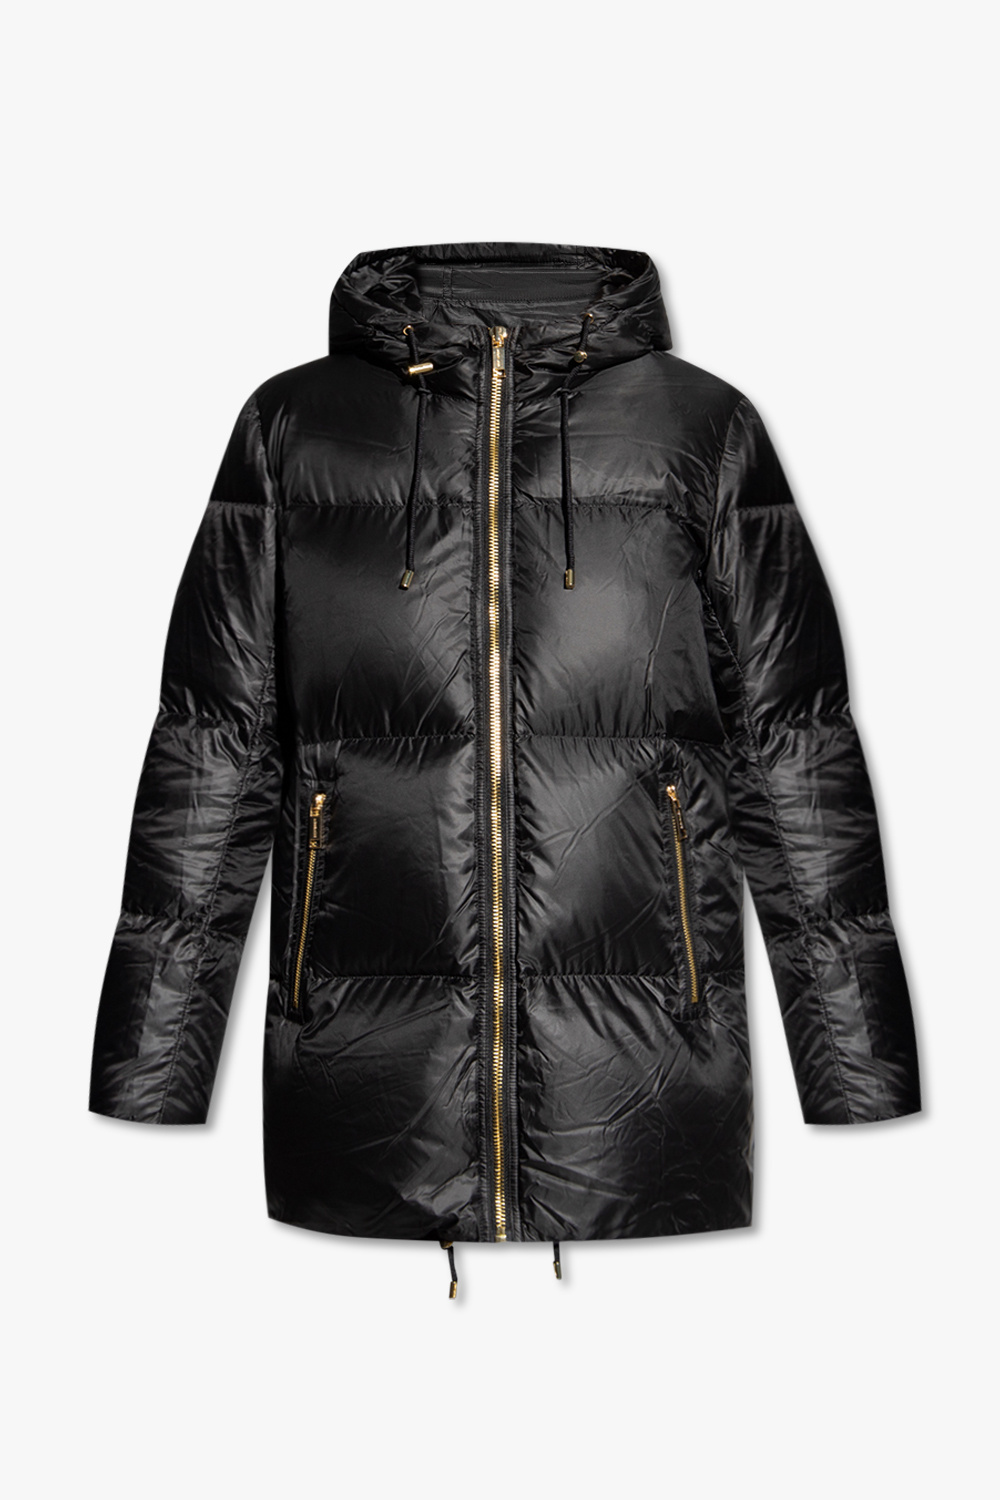 Michael Kors Faux Fur Trim Quilted Nylon Packable Puffer Jacket In Black   ModeSens